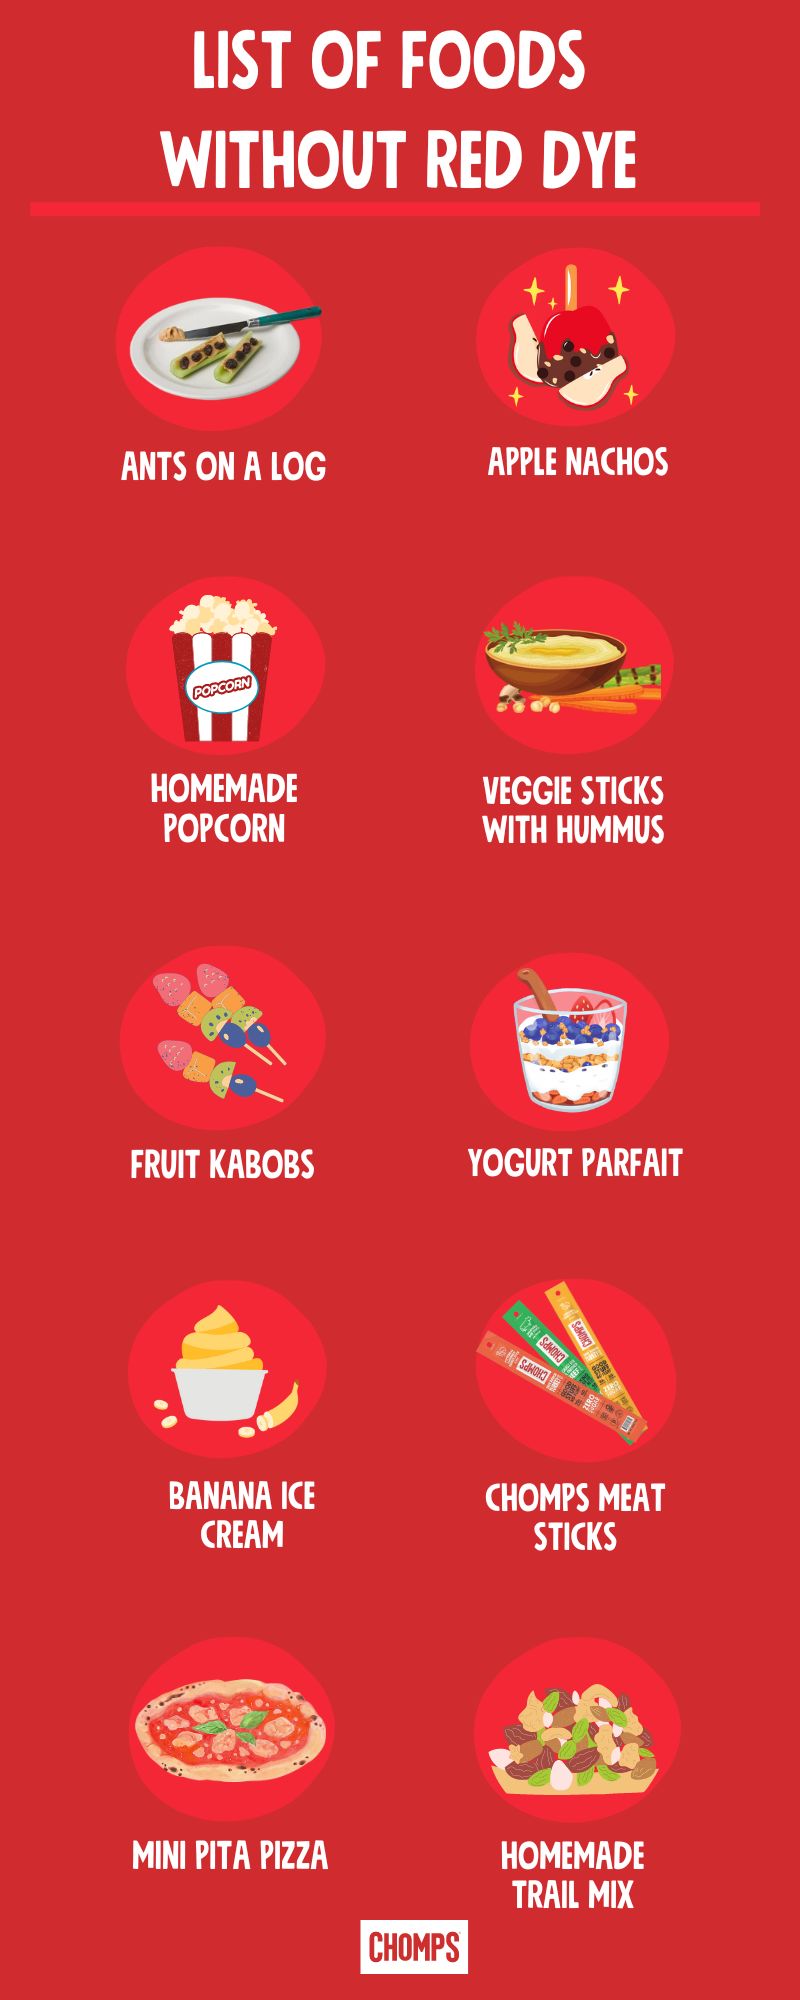 Infographic regrouping a list of foods without red dye